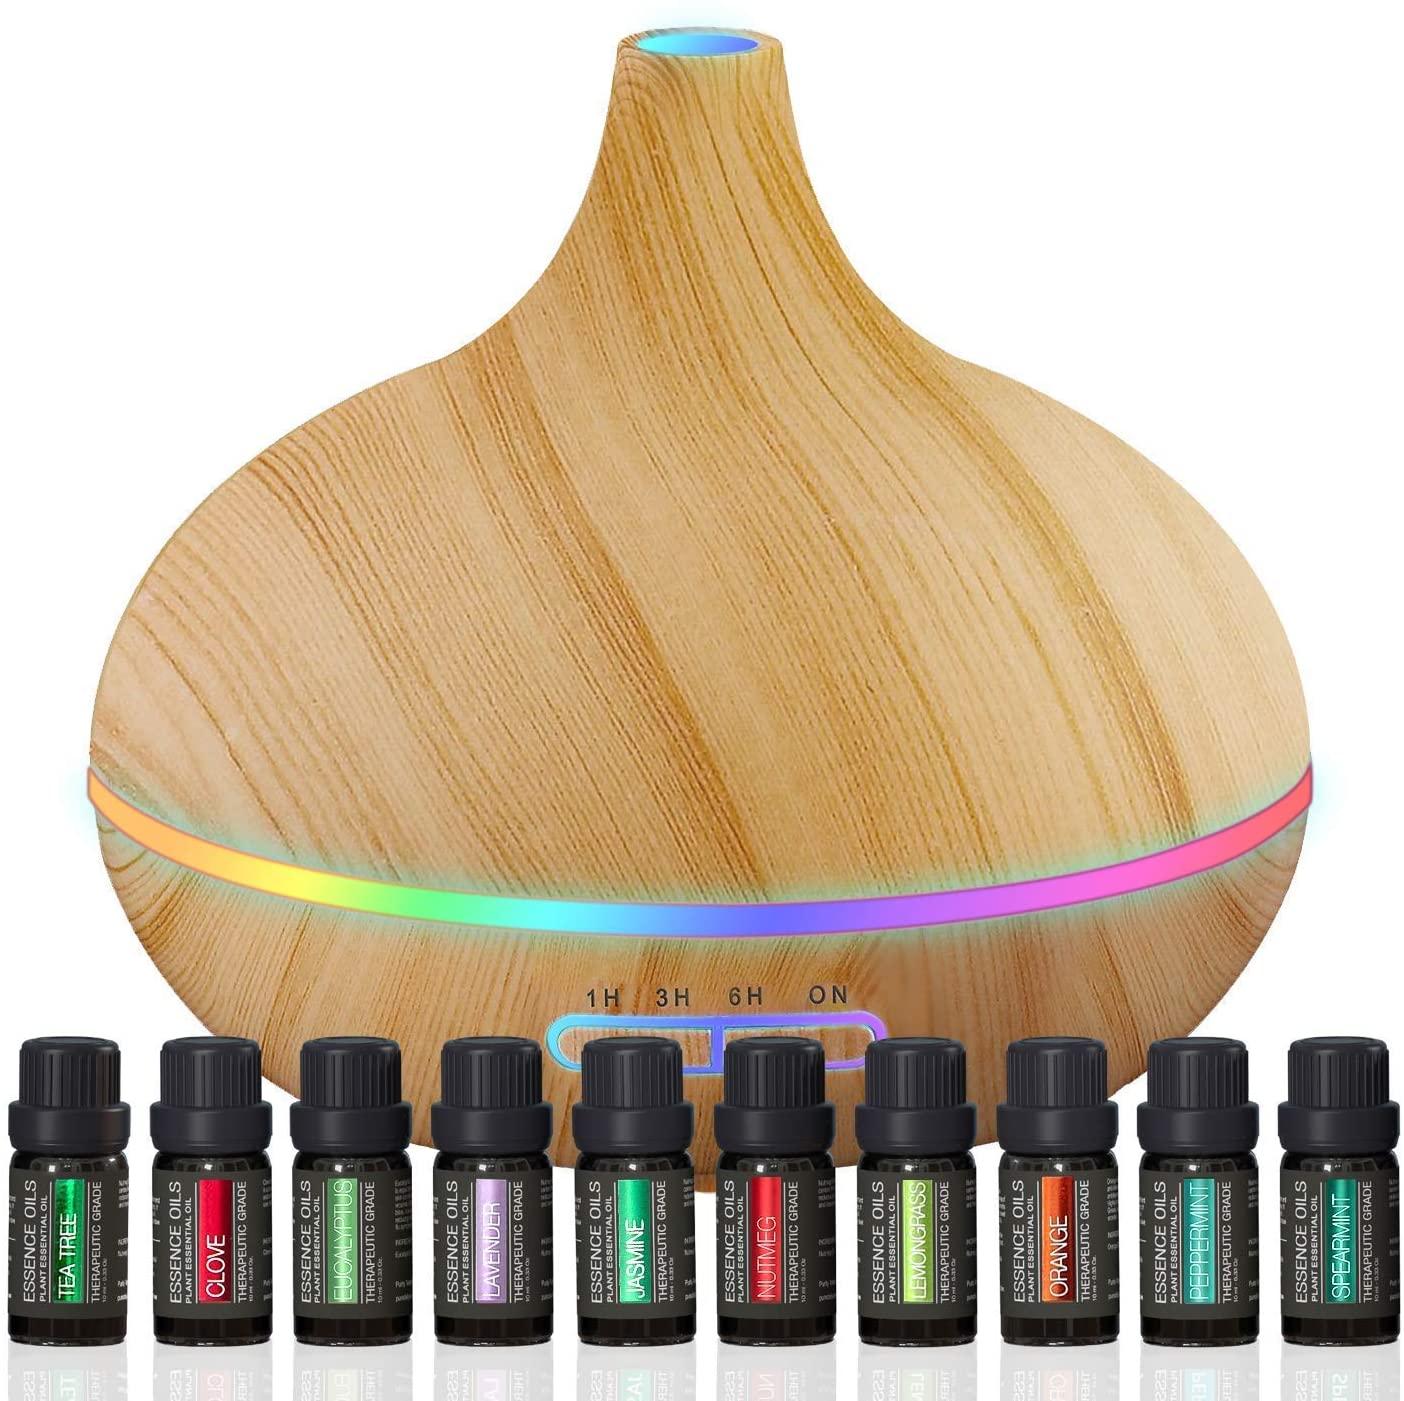 Ultimate Aromatherapy Diffuser and Essential Oil Set for $25.57 Shipped